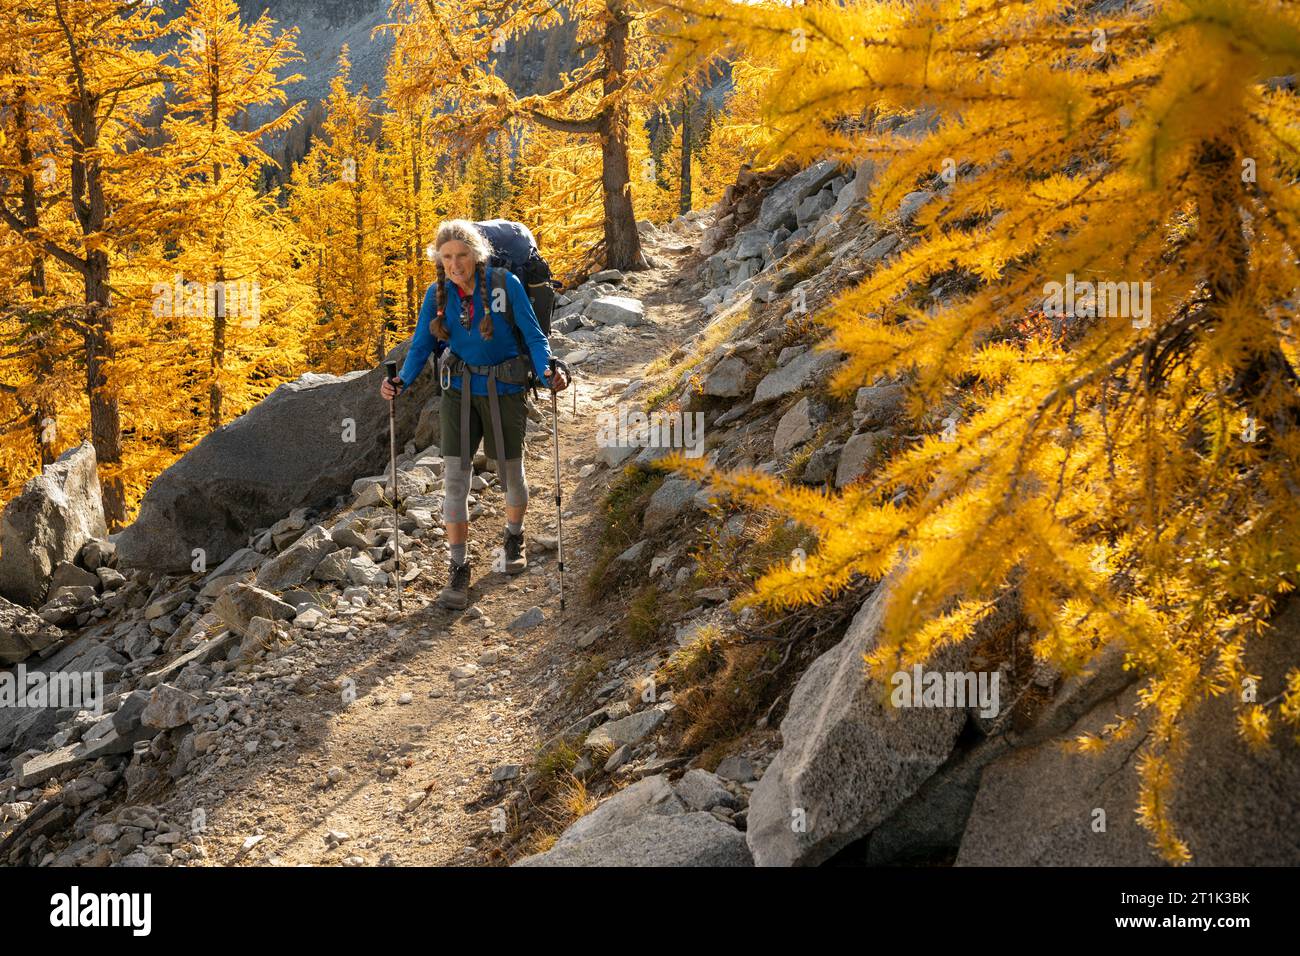 WA24569-00....WASHINGTON - Vicky Spring backpacking on the trail to Boiling lake in the Wenatchee Okanogan National Forest. MR#S1 Stock Photo